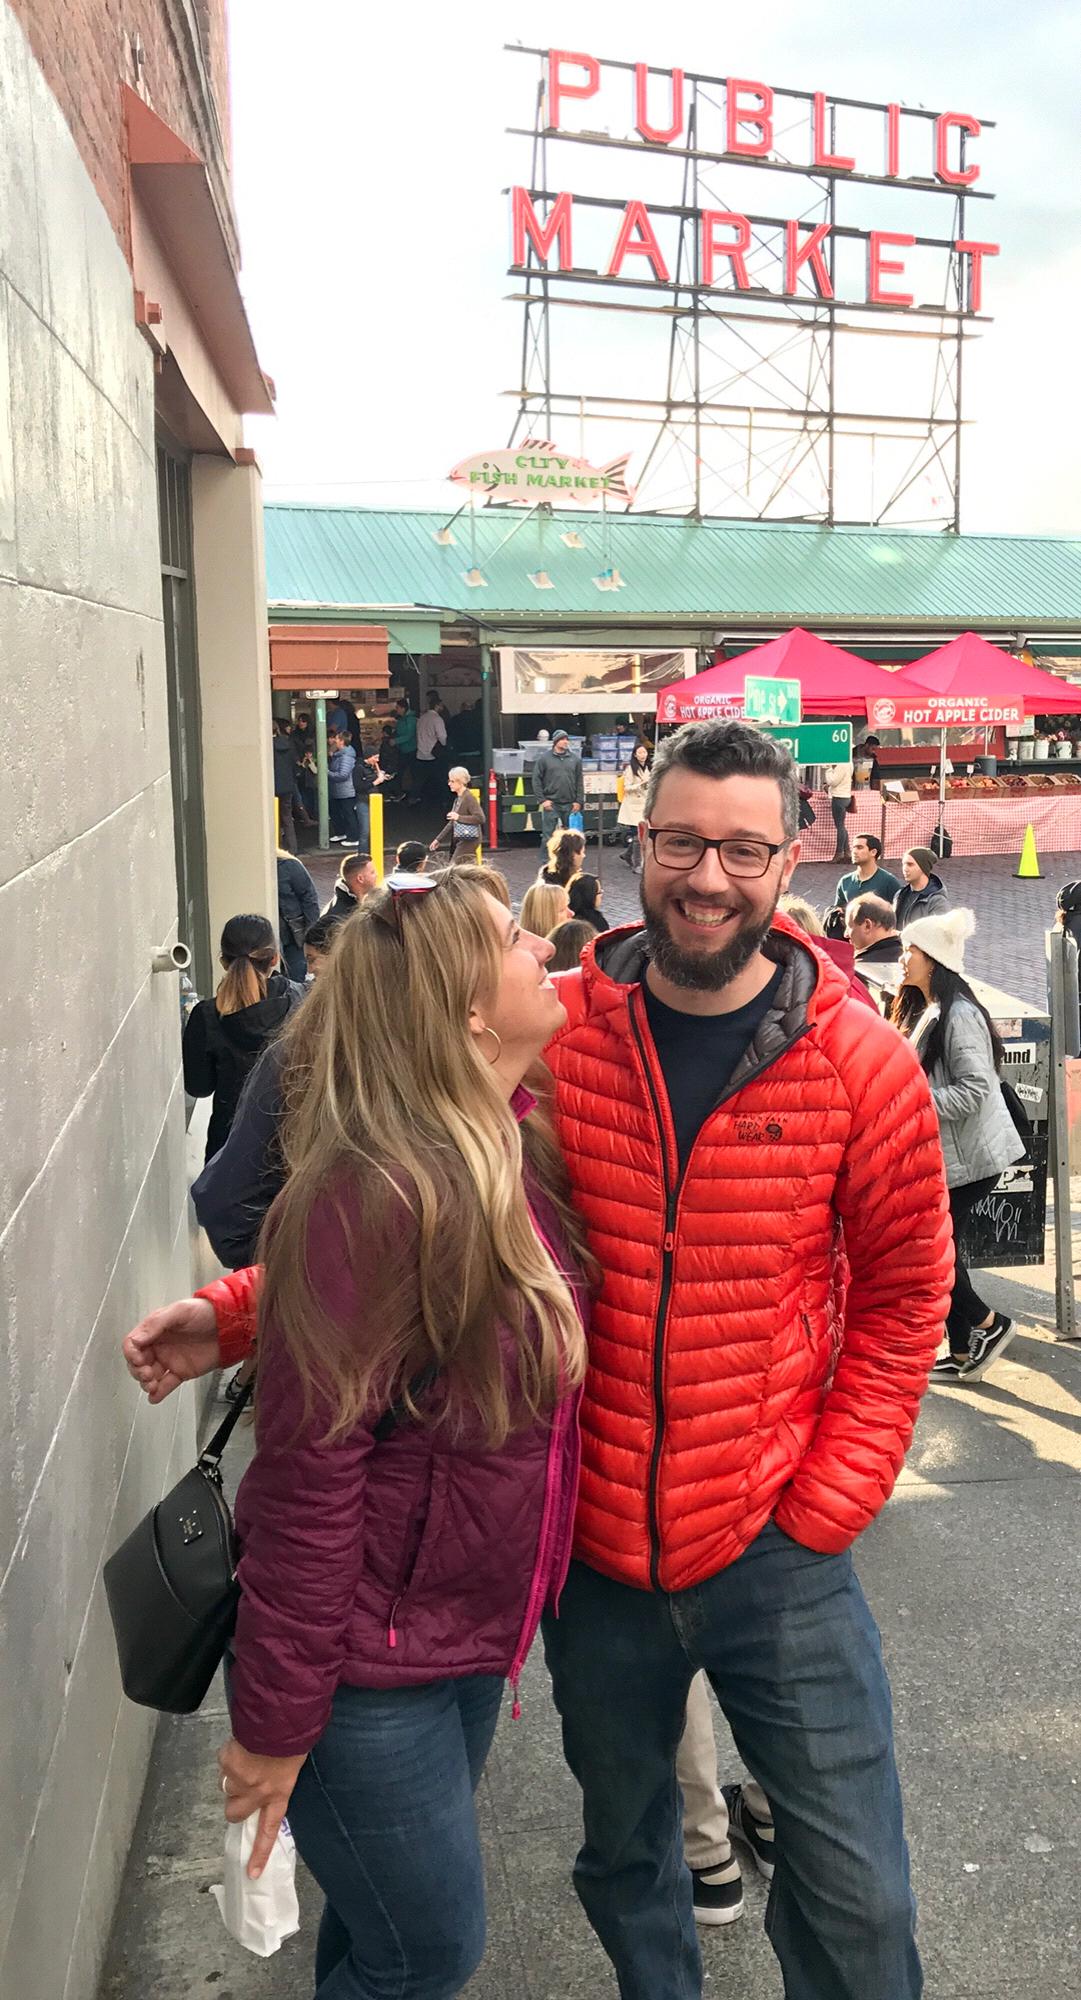 Being tourists at Pike Place Market in Seattle, WA - November 2017